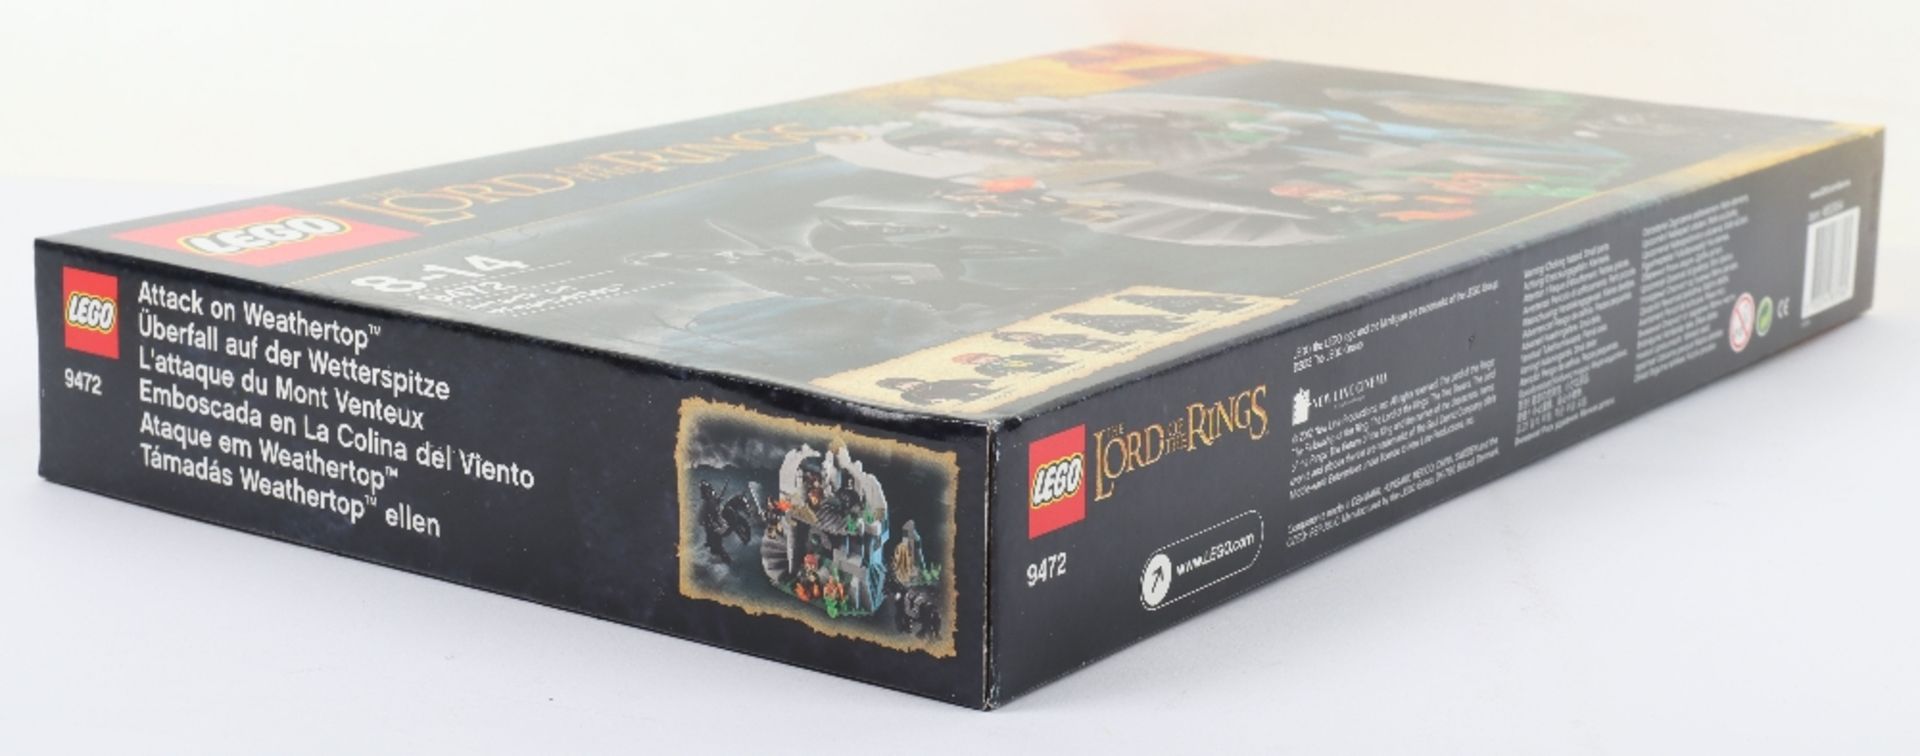 Lego Lord of the rings 9472 Attack Weathertop sealed boxed - Image 6 of 7